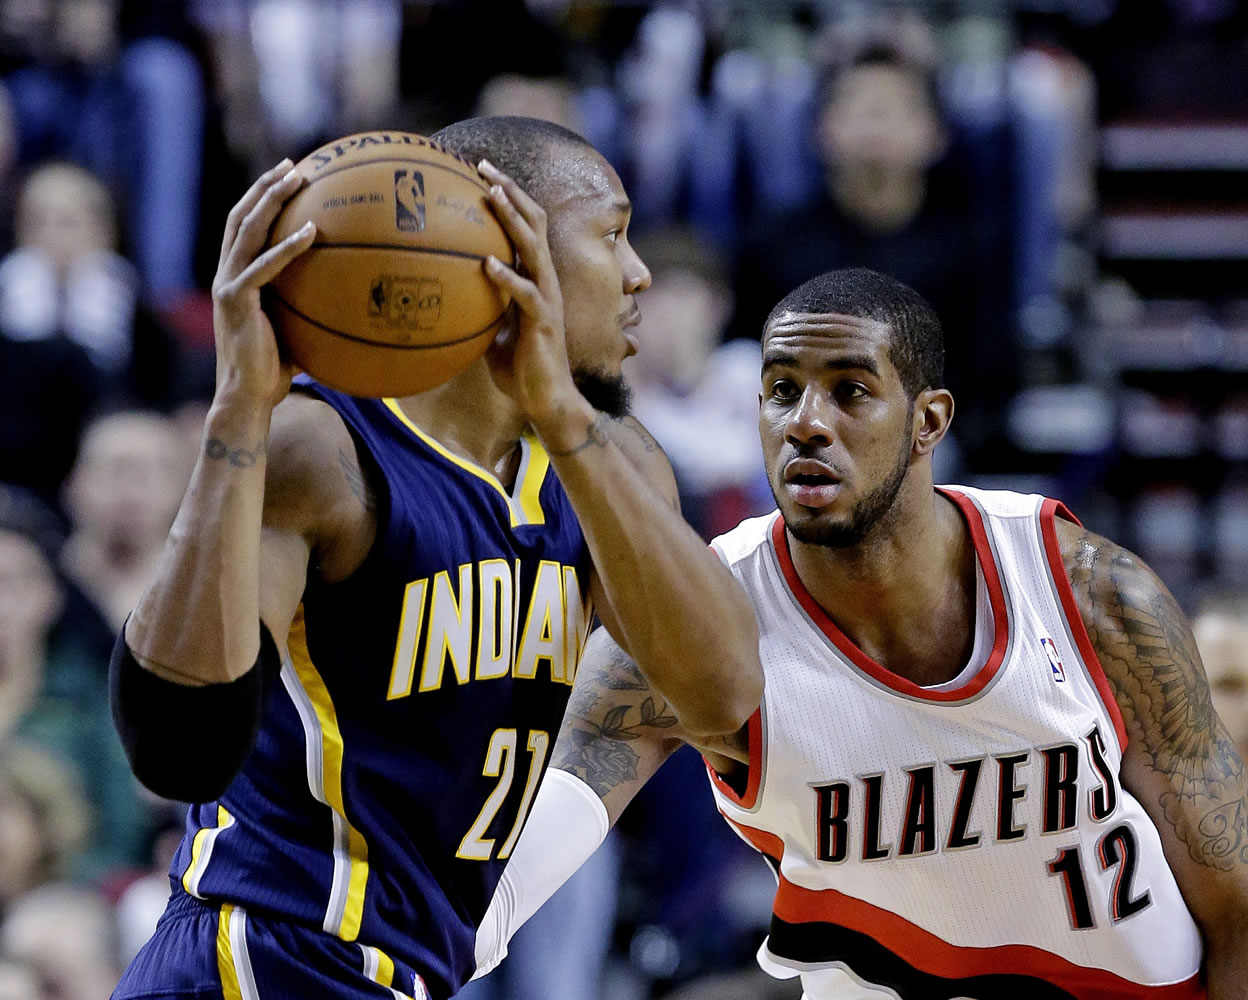 Portland Trail Blazers forward LaMarcus Aldridge, right, defends Indiana Pacers forward David West during the first quarter of an NBA basketball game in Portland, Ore., Wednesday, Jan. 23, 2013.